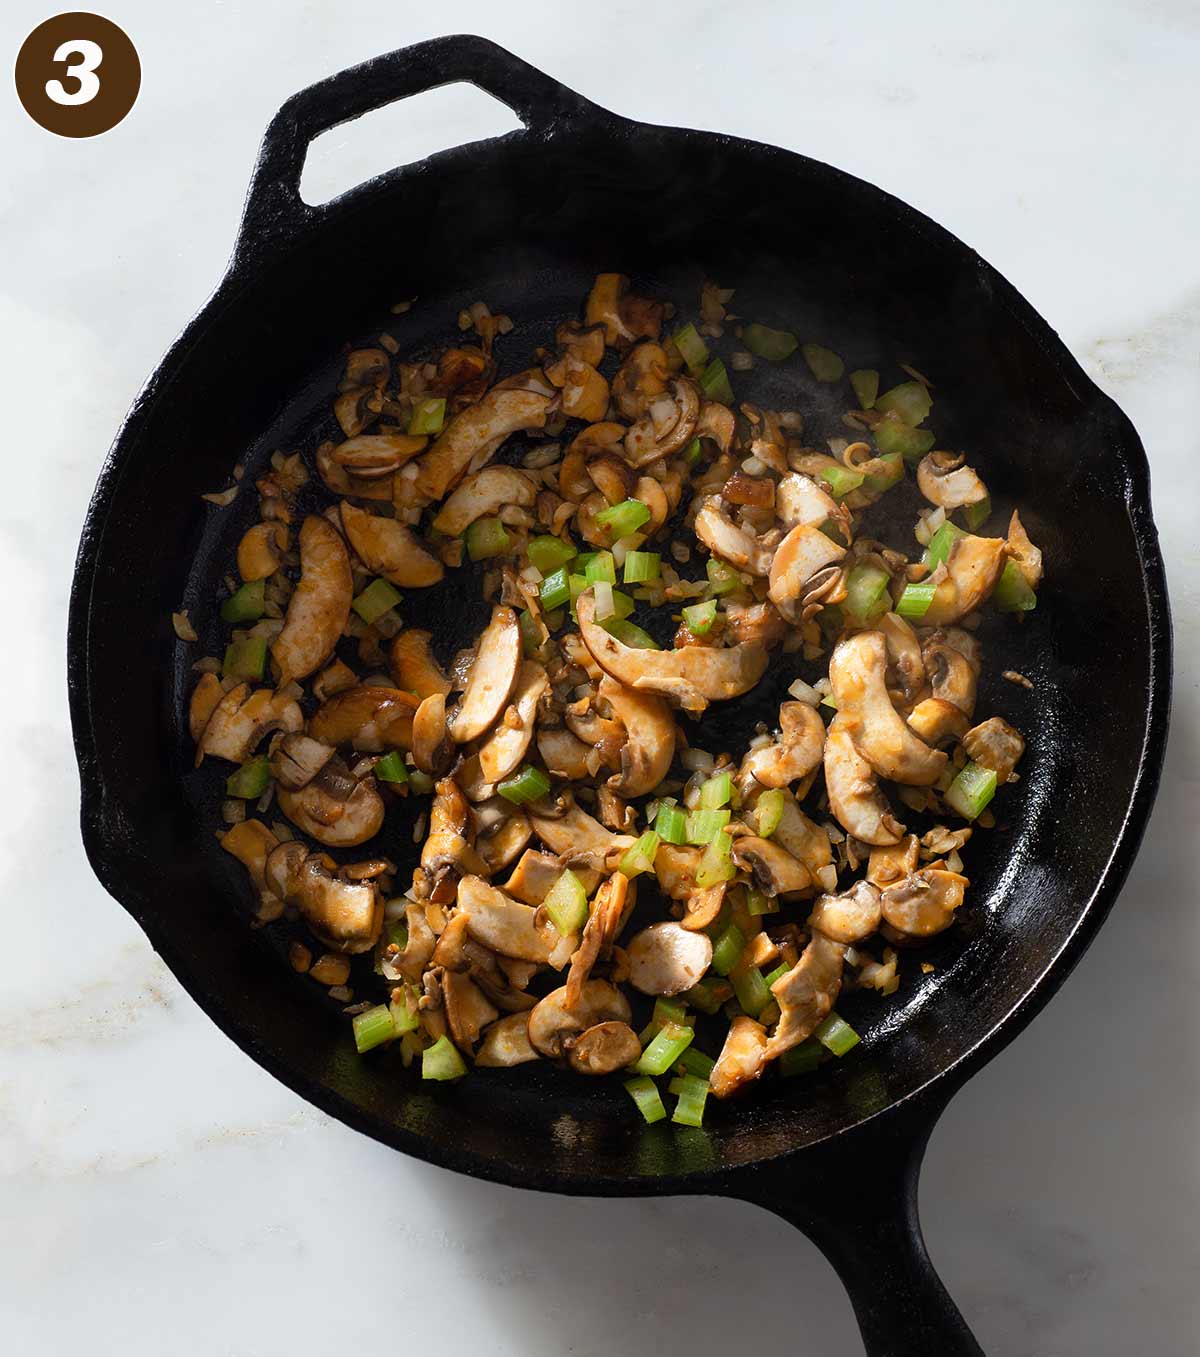 Cooked celery, onion and mushrooms in a cast iron skillet.